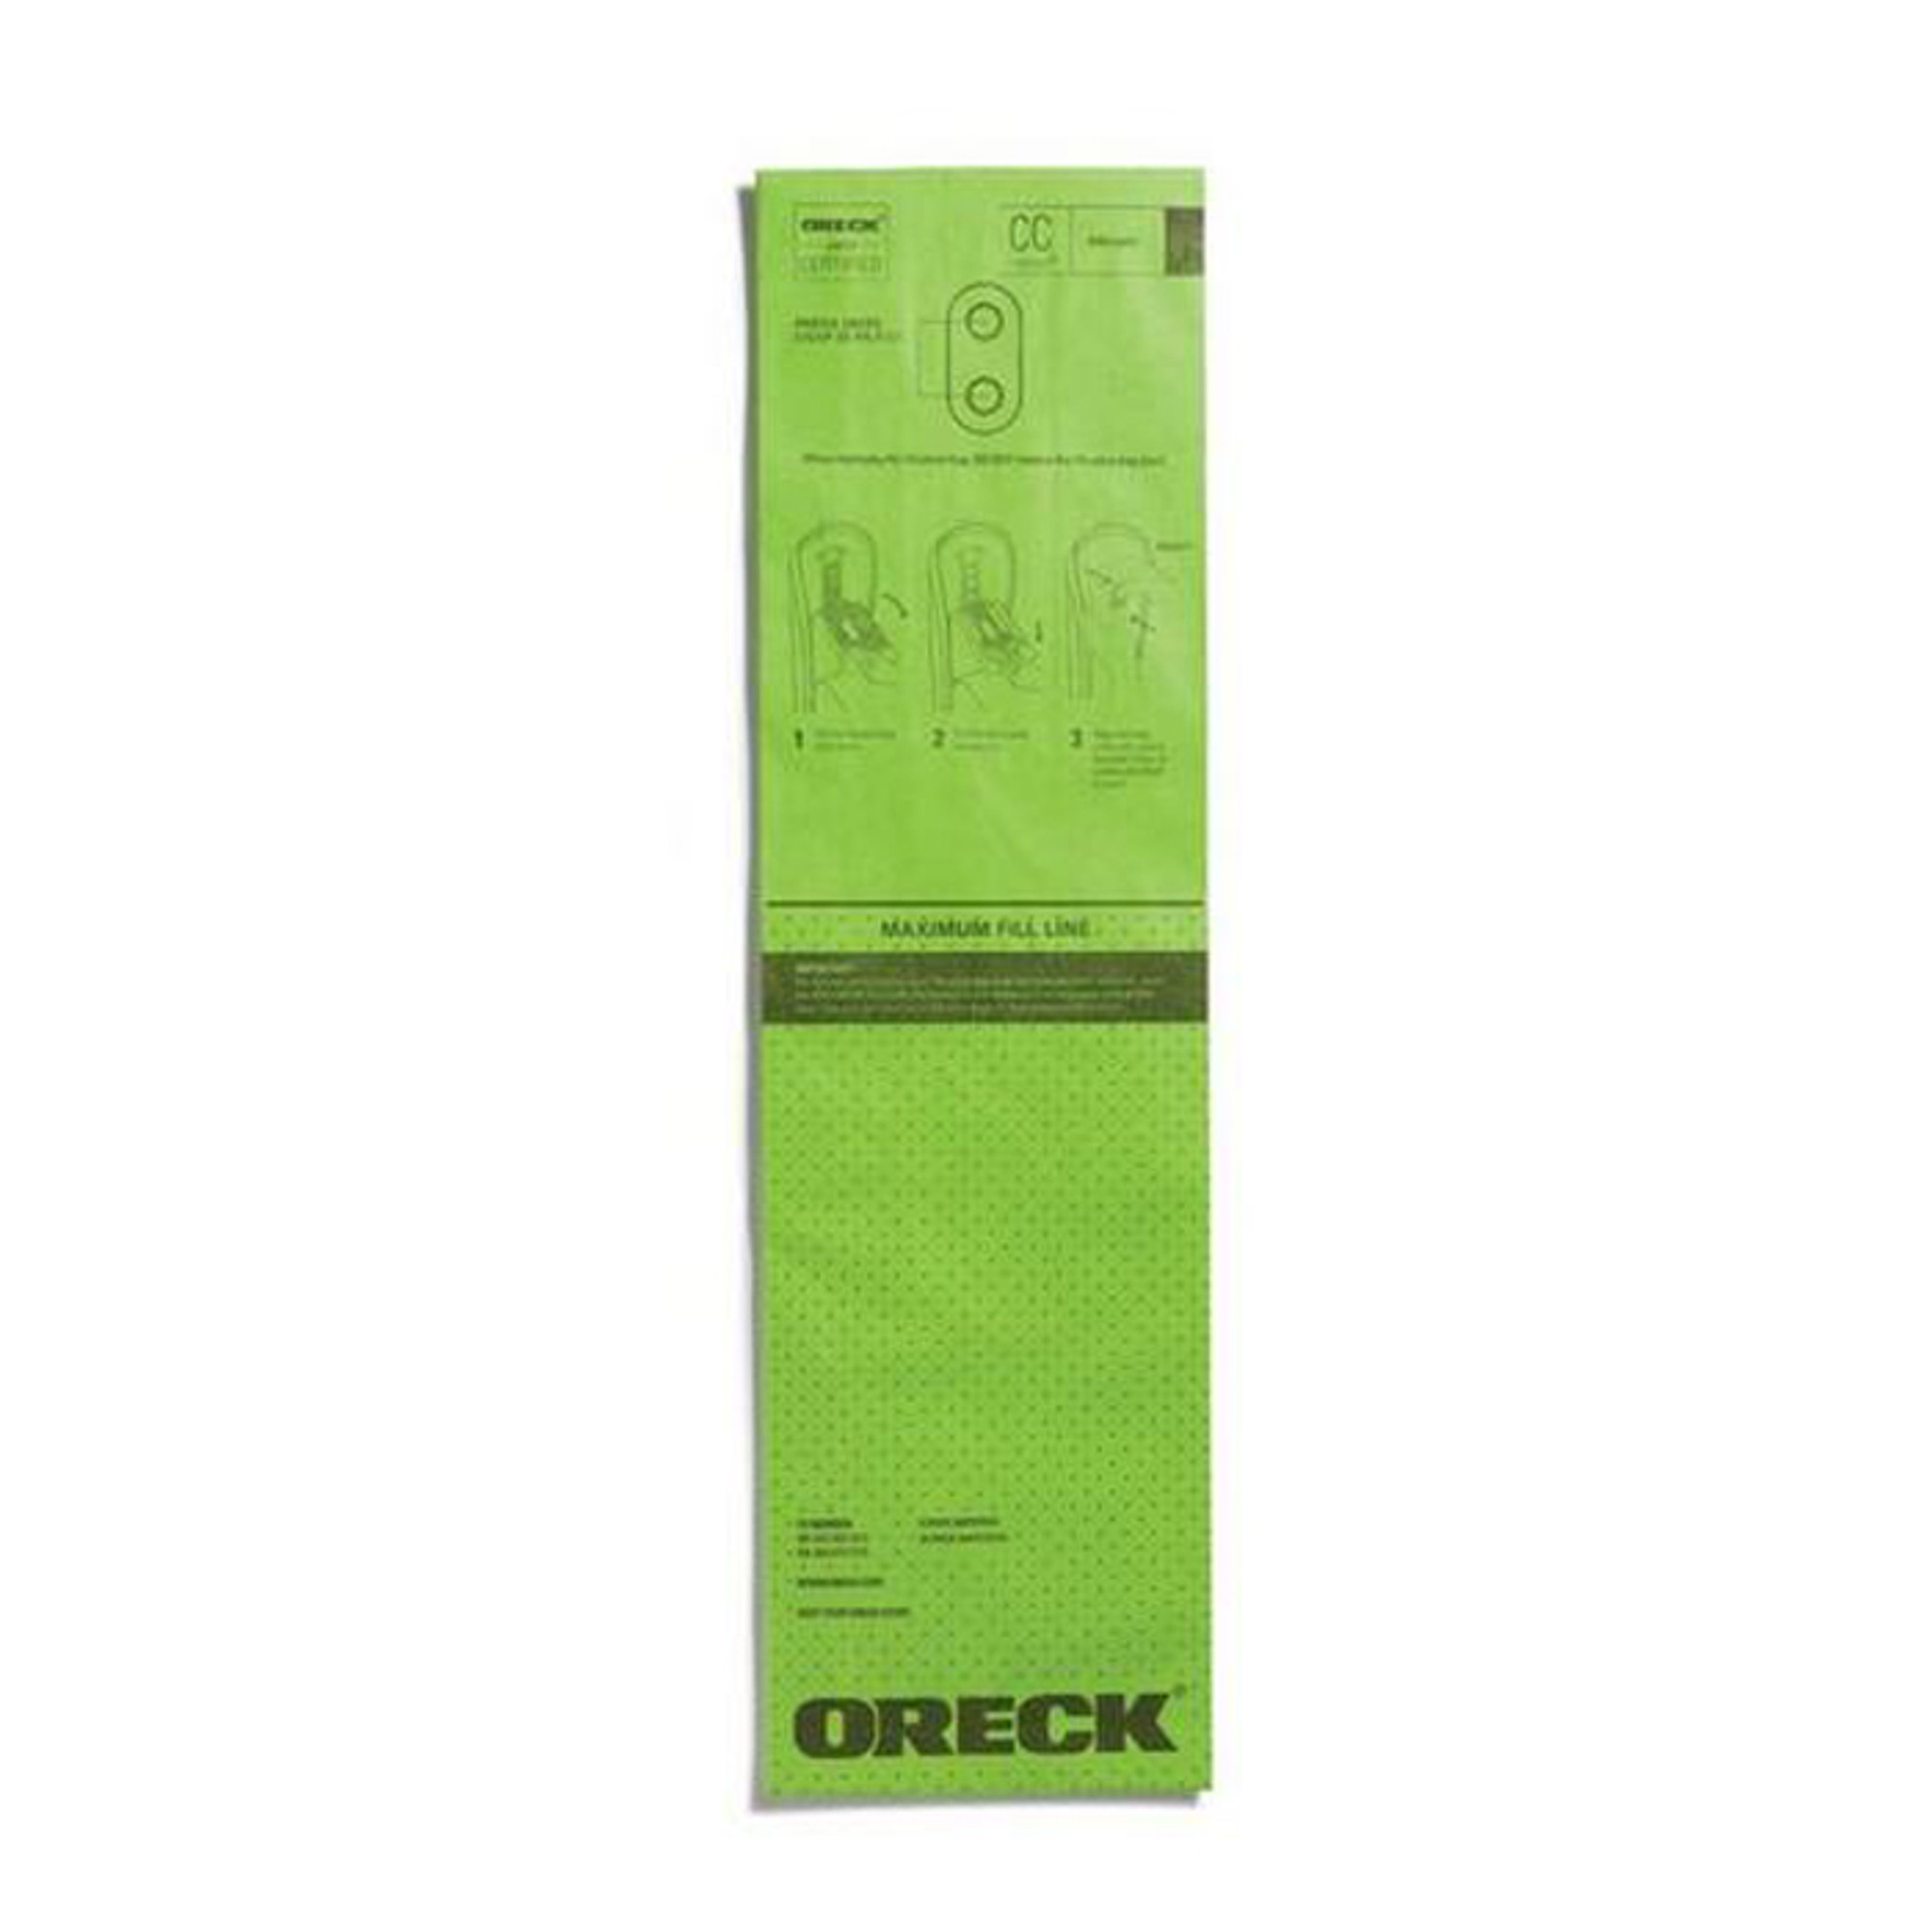 4 Pack Oreck Vacuum Bags CCPK40F Type CC 4 Layer Celoc Charcoal Filter |  eBay